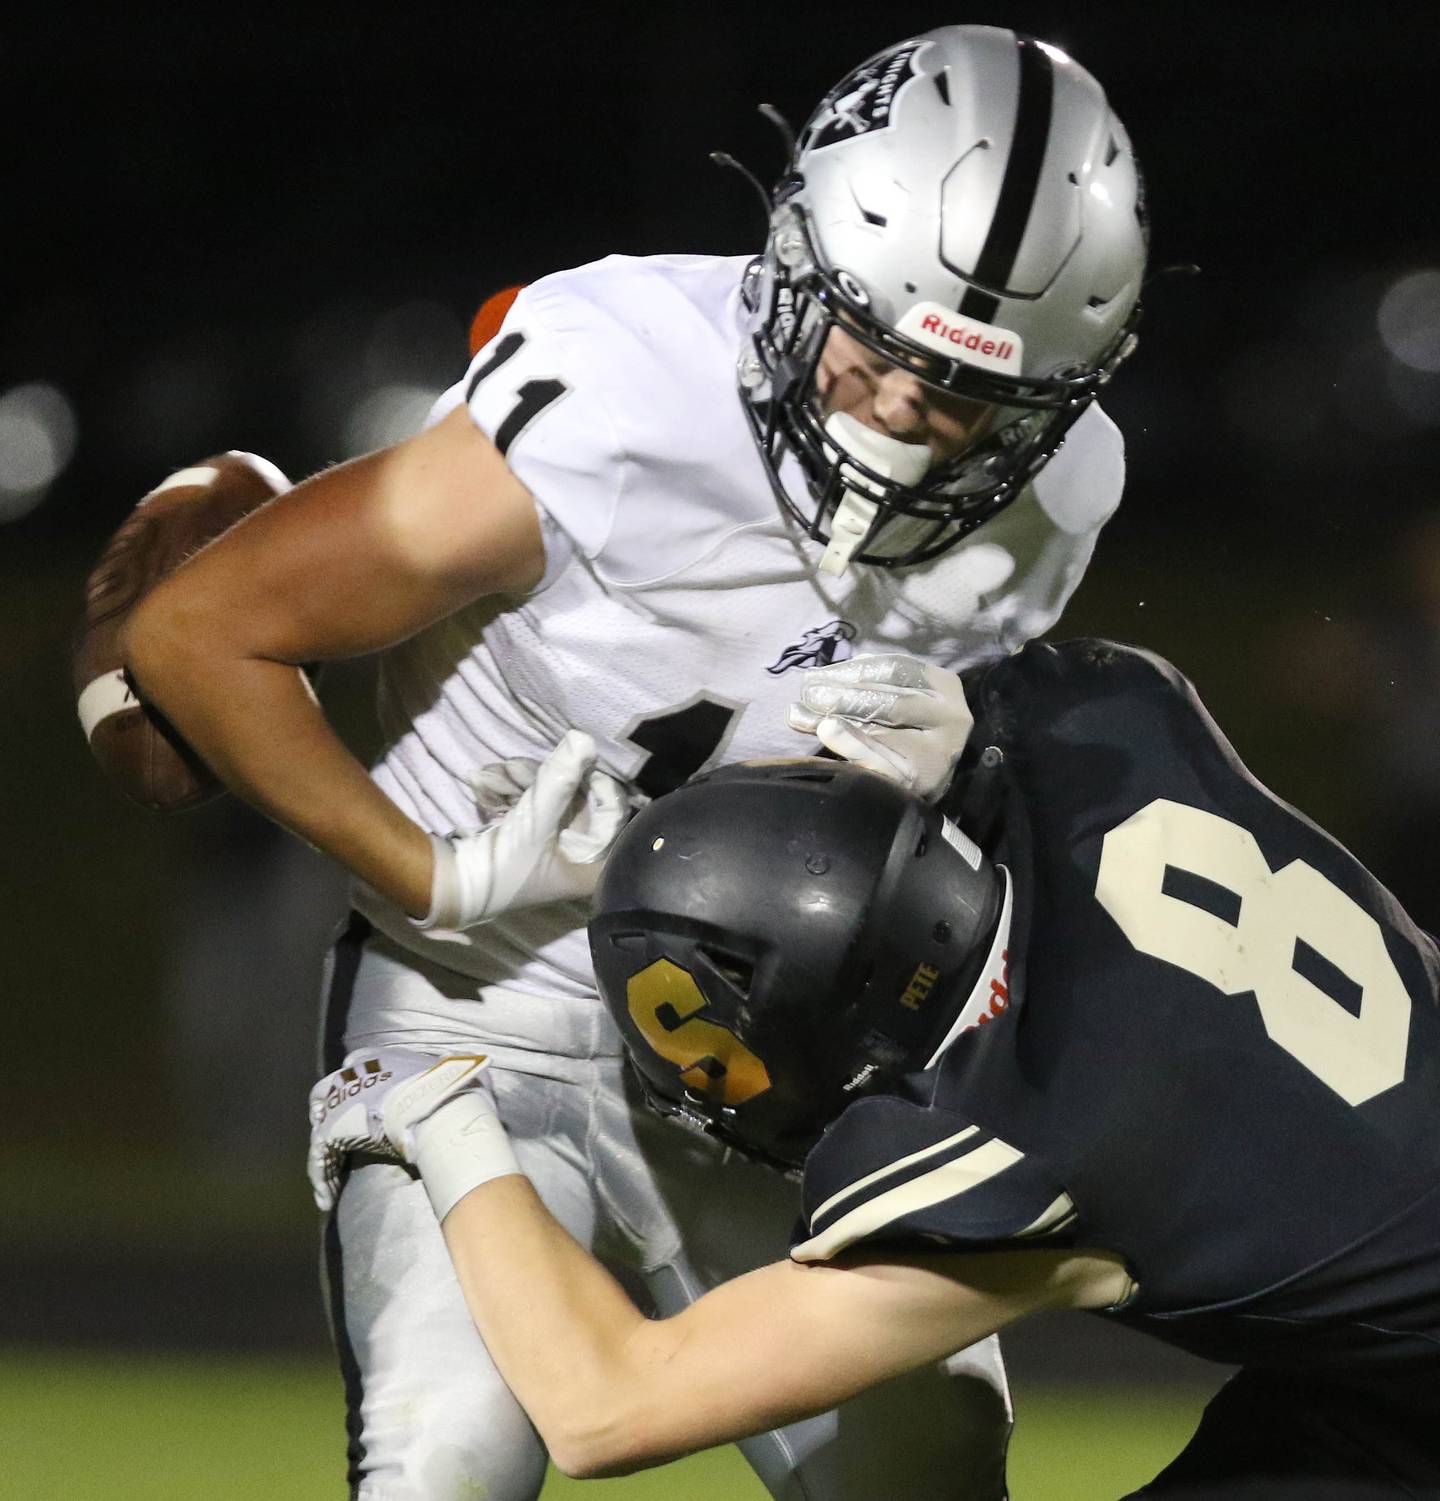 Sycamore's Brody Armstrong forces Kaneland's Dominick DeBlasio to fumble which resulted in a turnover during their game Friday, Sep. 10, 2021 at Sycamore High School.